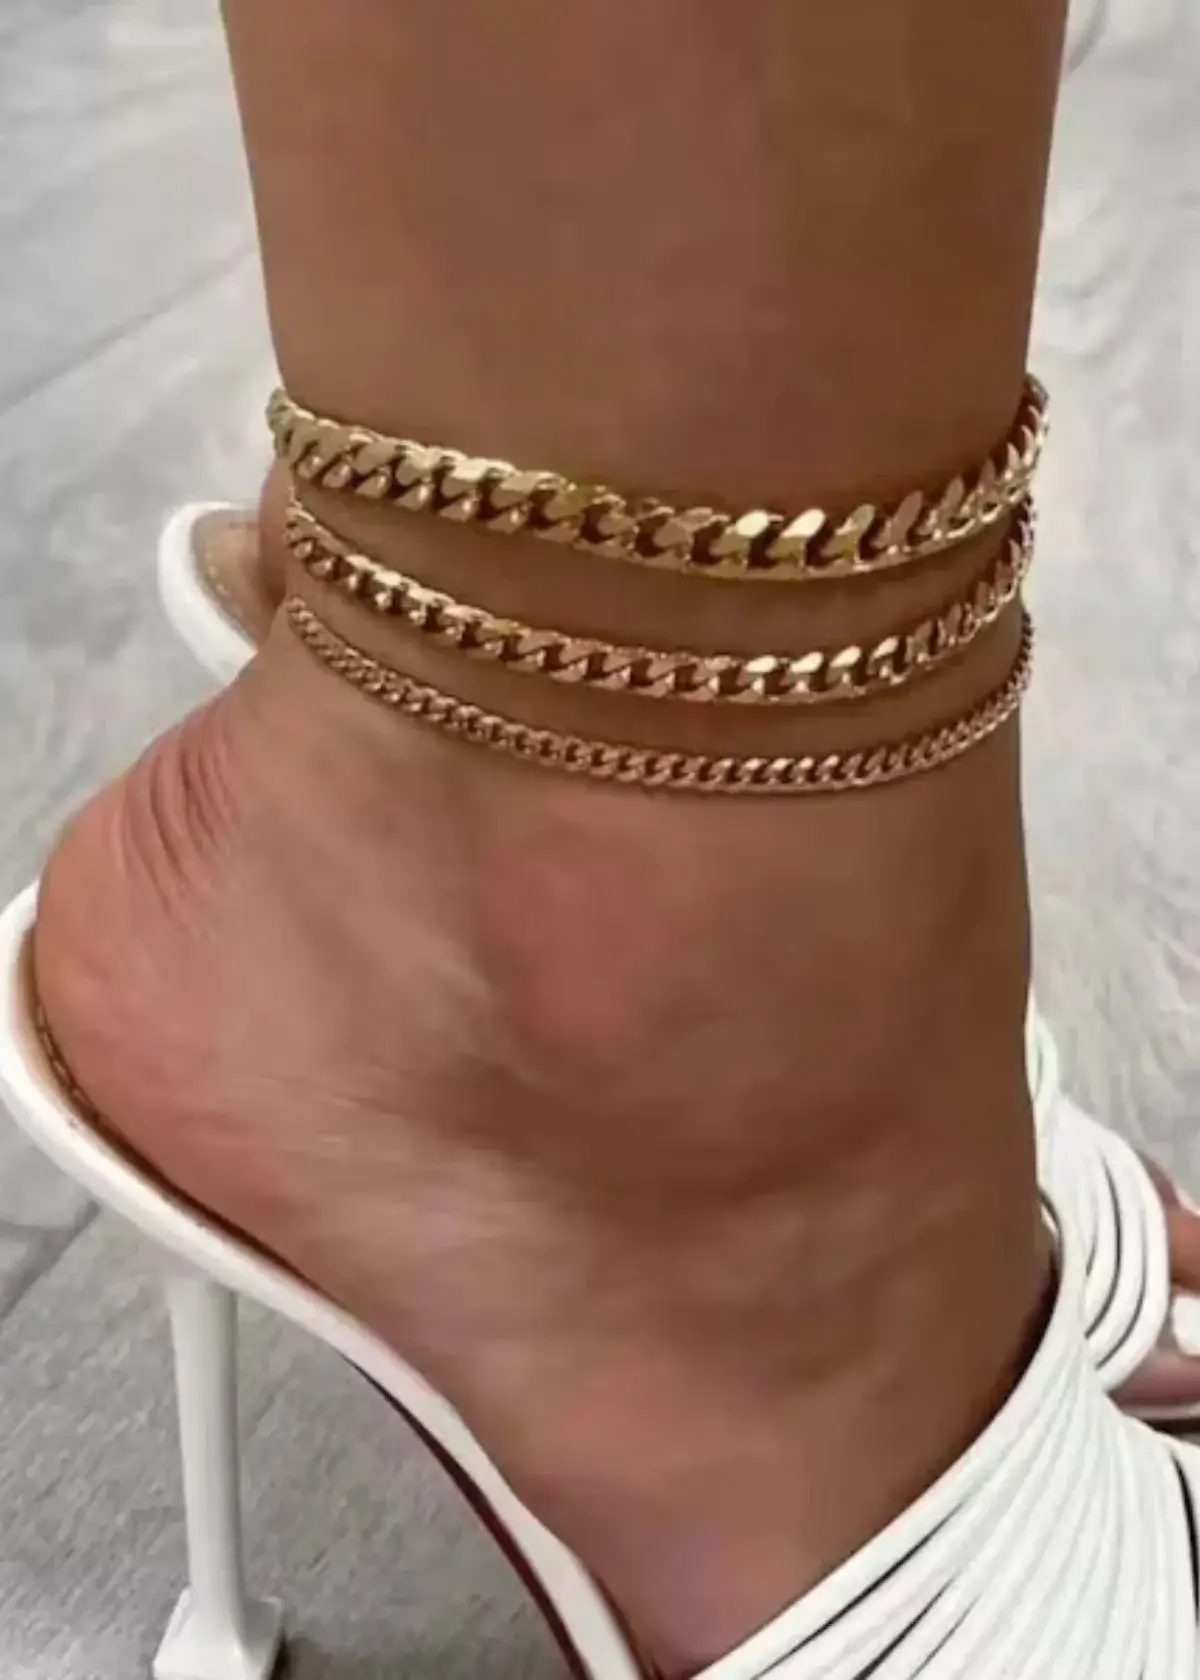 What is a gold ankle bracelet?